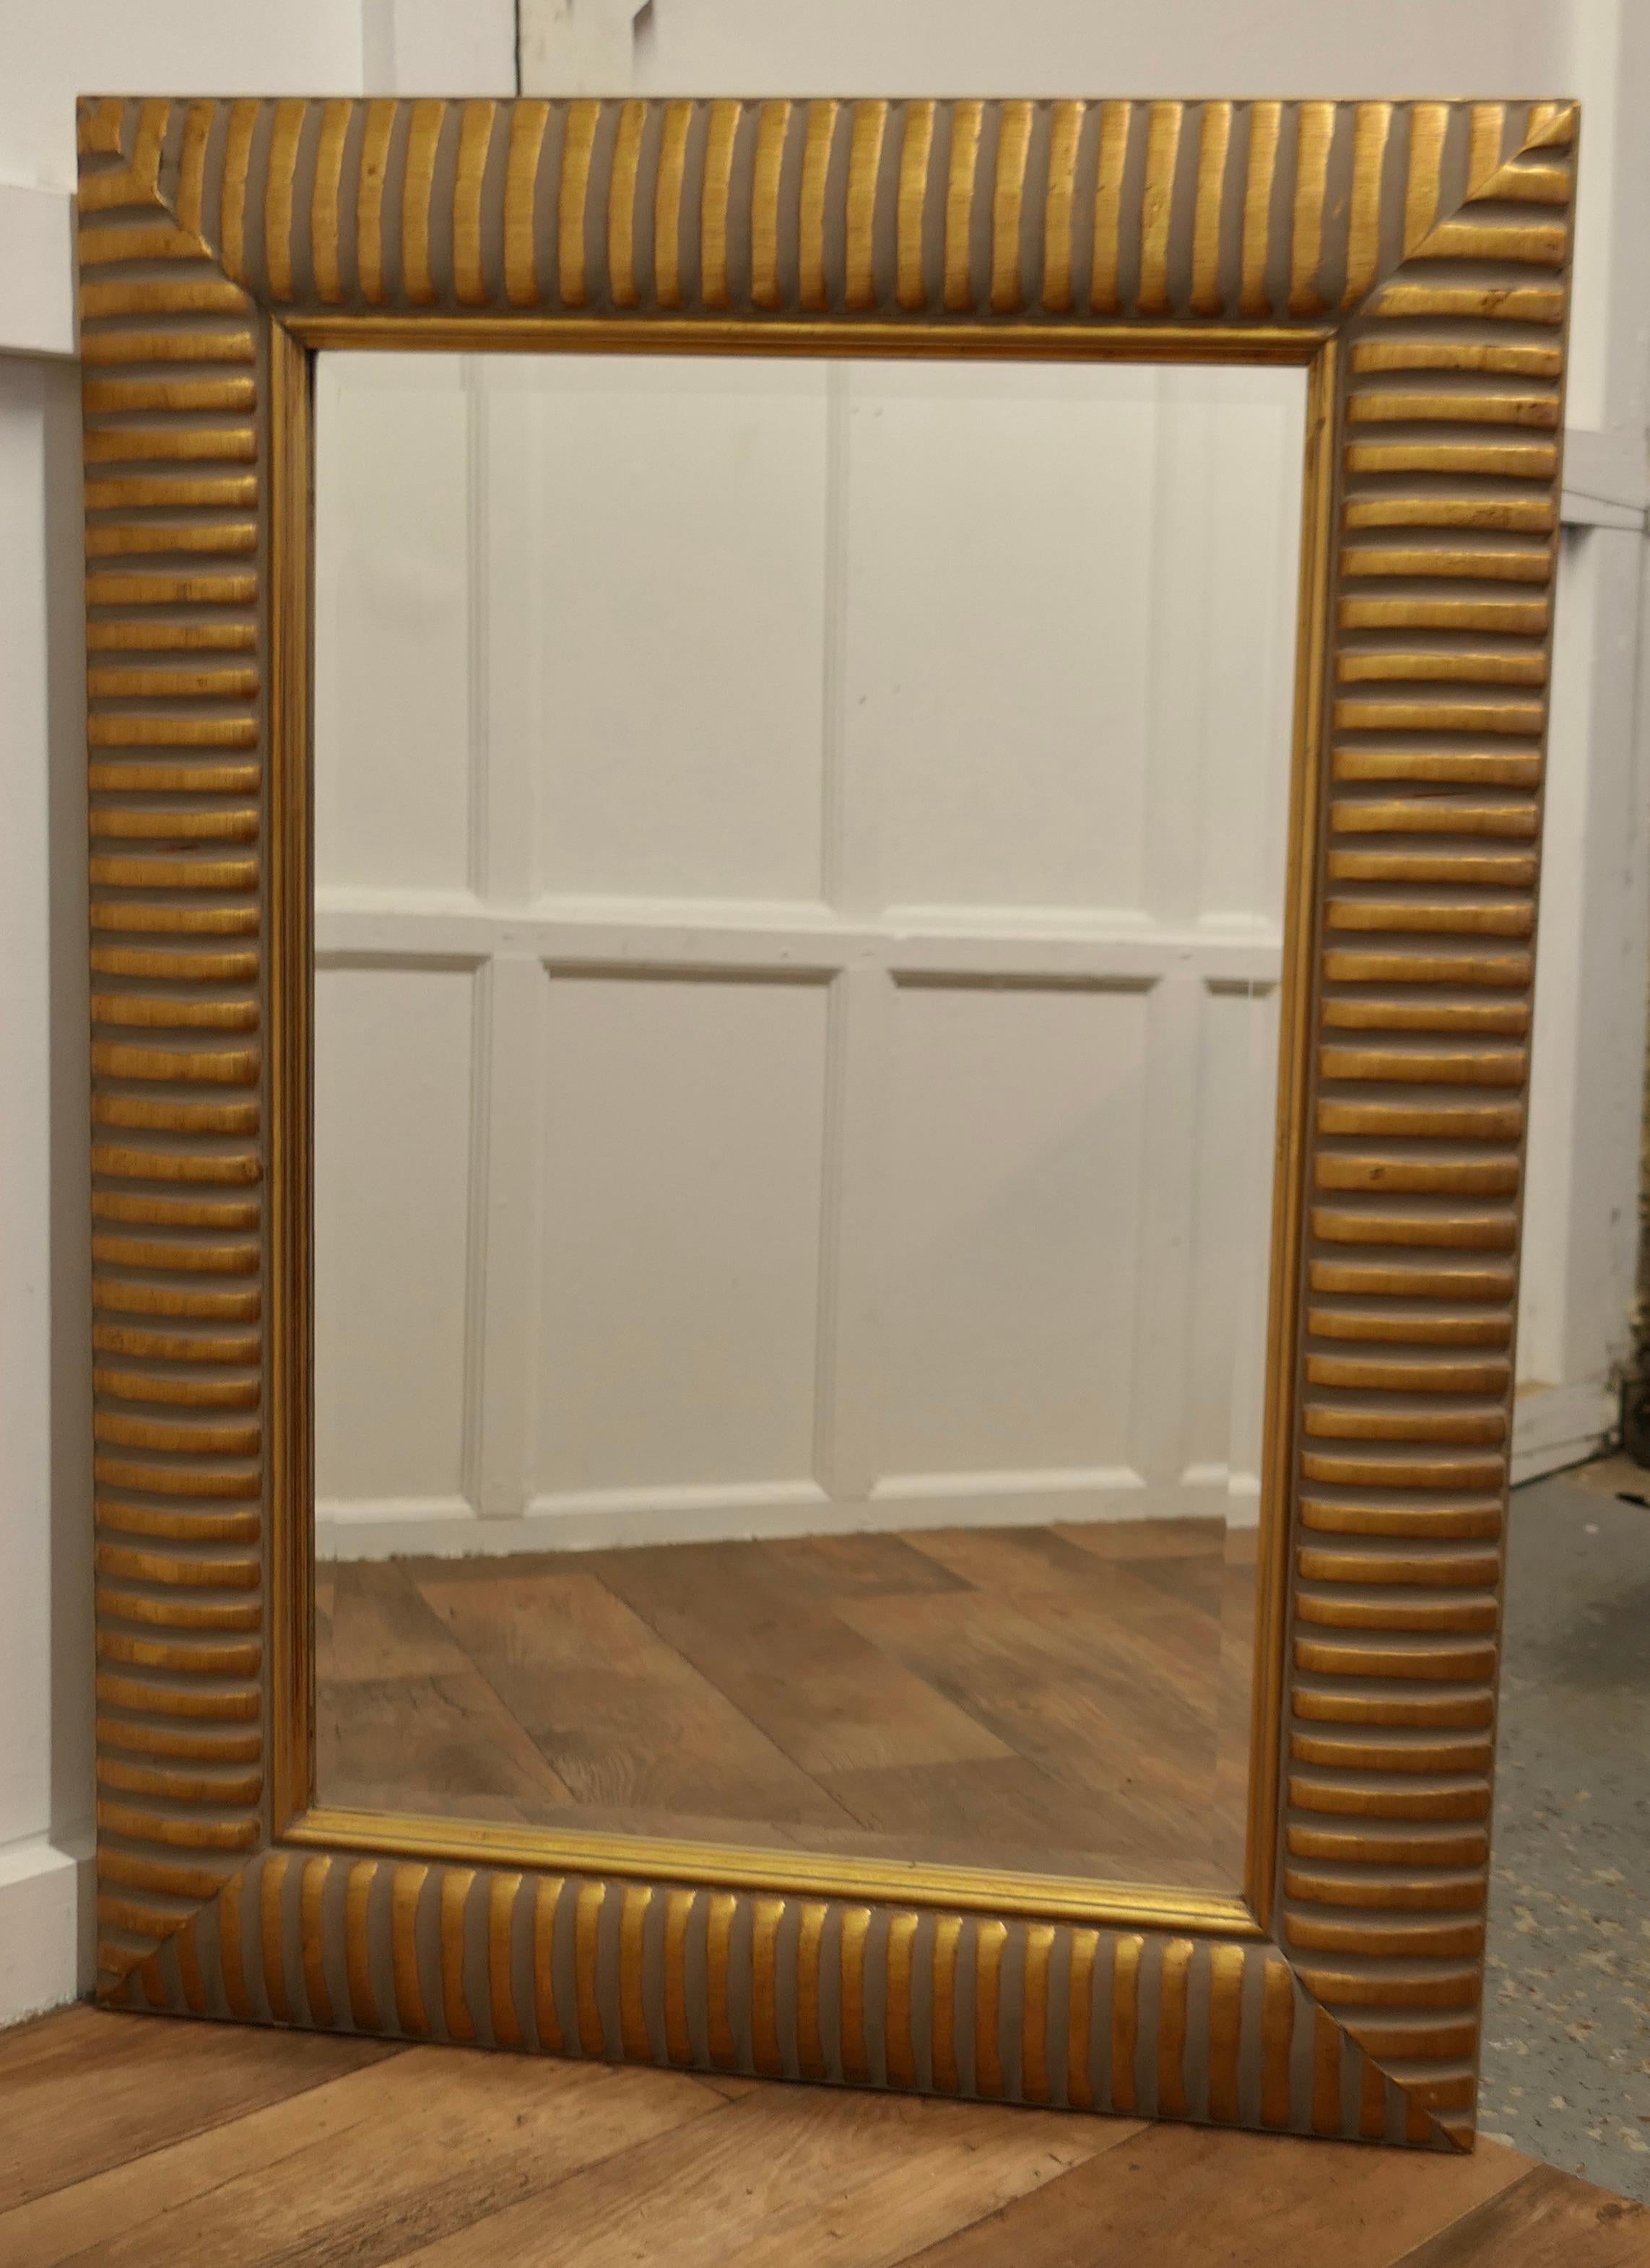 Mid Century Tutankhamun Inspired Wall Mirror

This is a large and very attractive piece, taking its inspiration for the 1960s enthusiasm for all things Egyptian 
The tall mirror is framed with a giant Gold stripe 6” wide frame, it has a bevelled